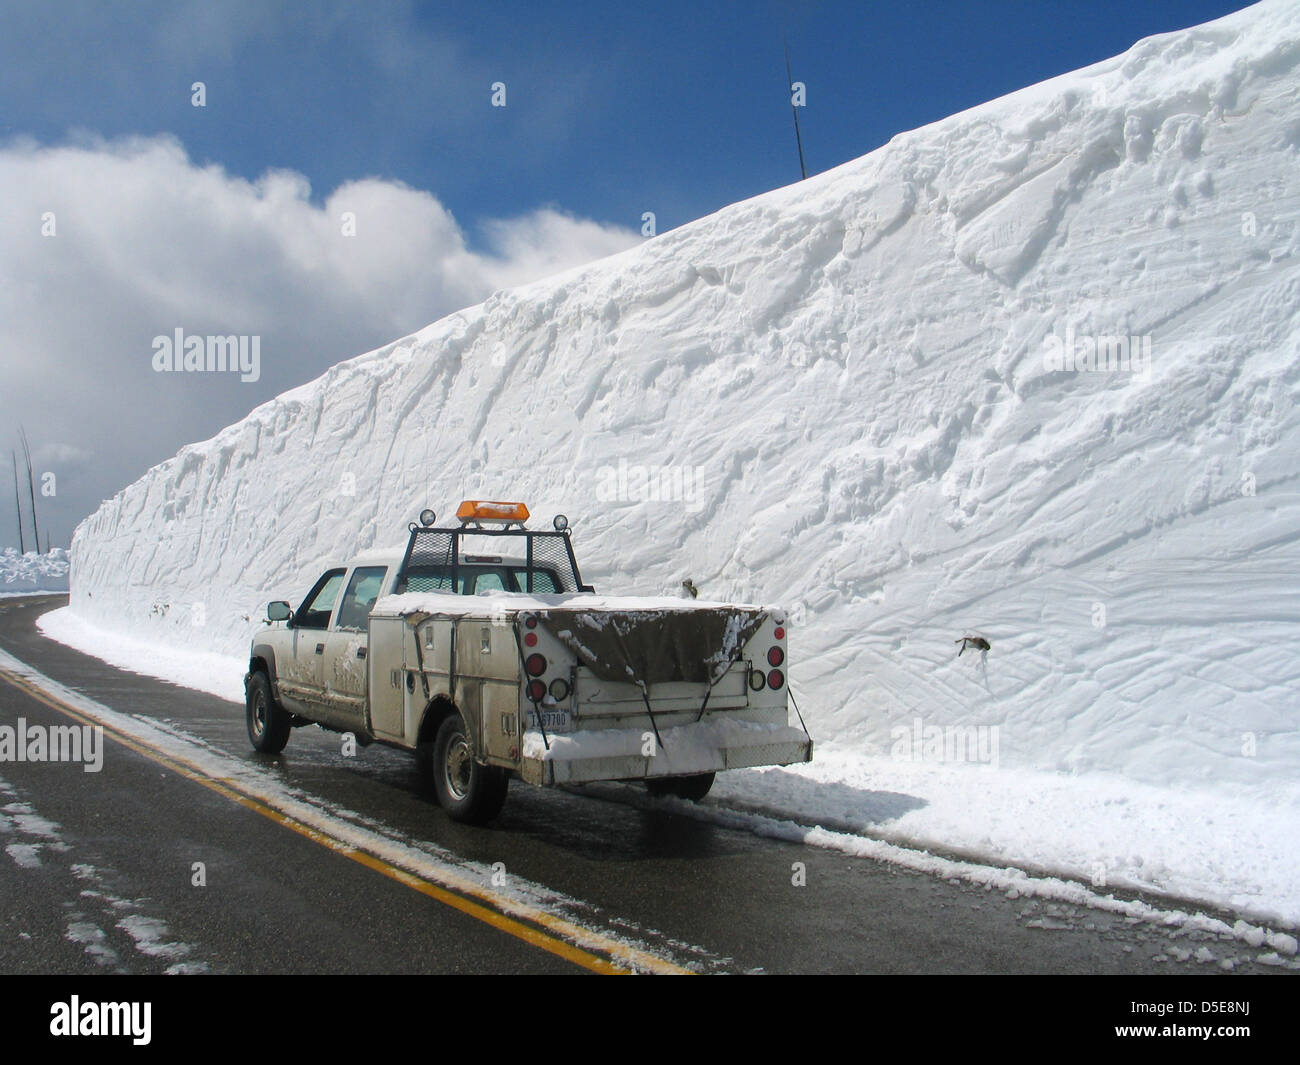 A truck next to a twenty foot high wall of snow from the Sylvan Pass in Absaroka Mountain Range Yellowstone National Park April 28, 2008 in Wyoming. Stock Photo